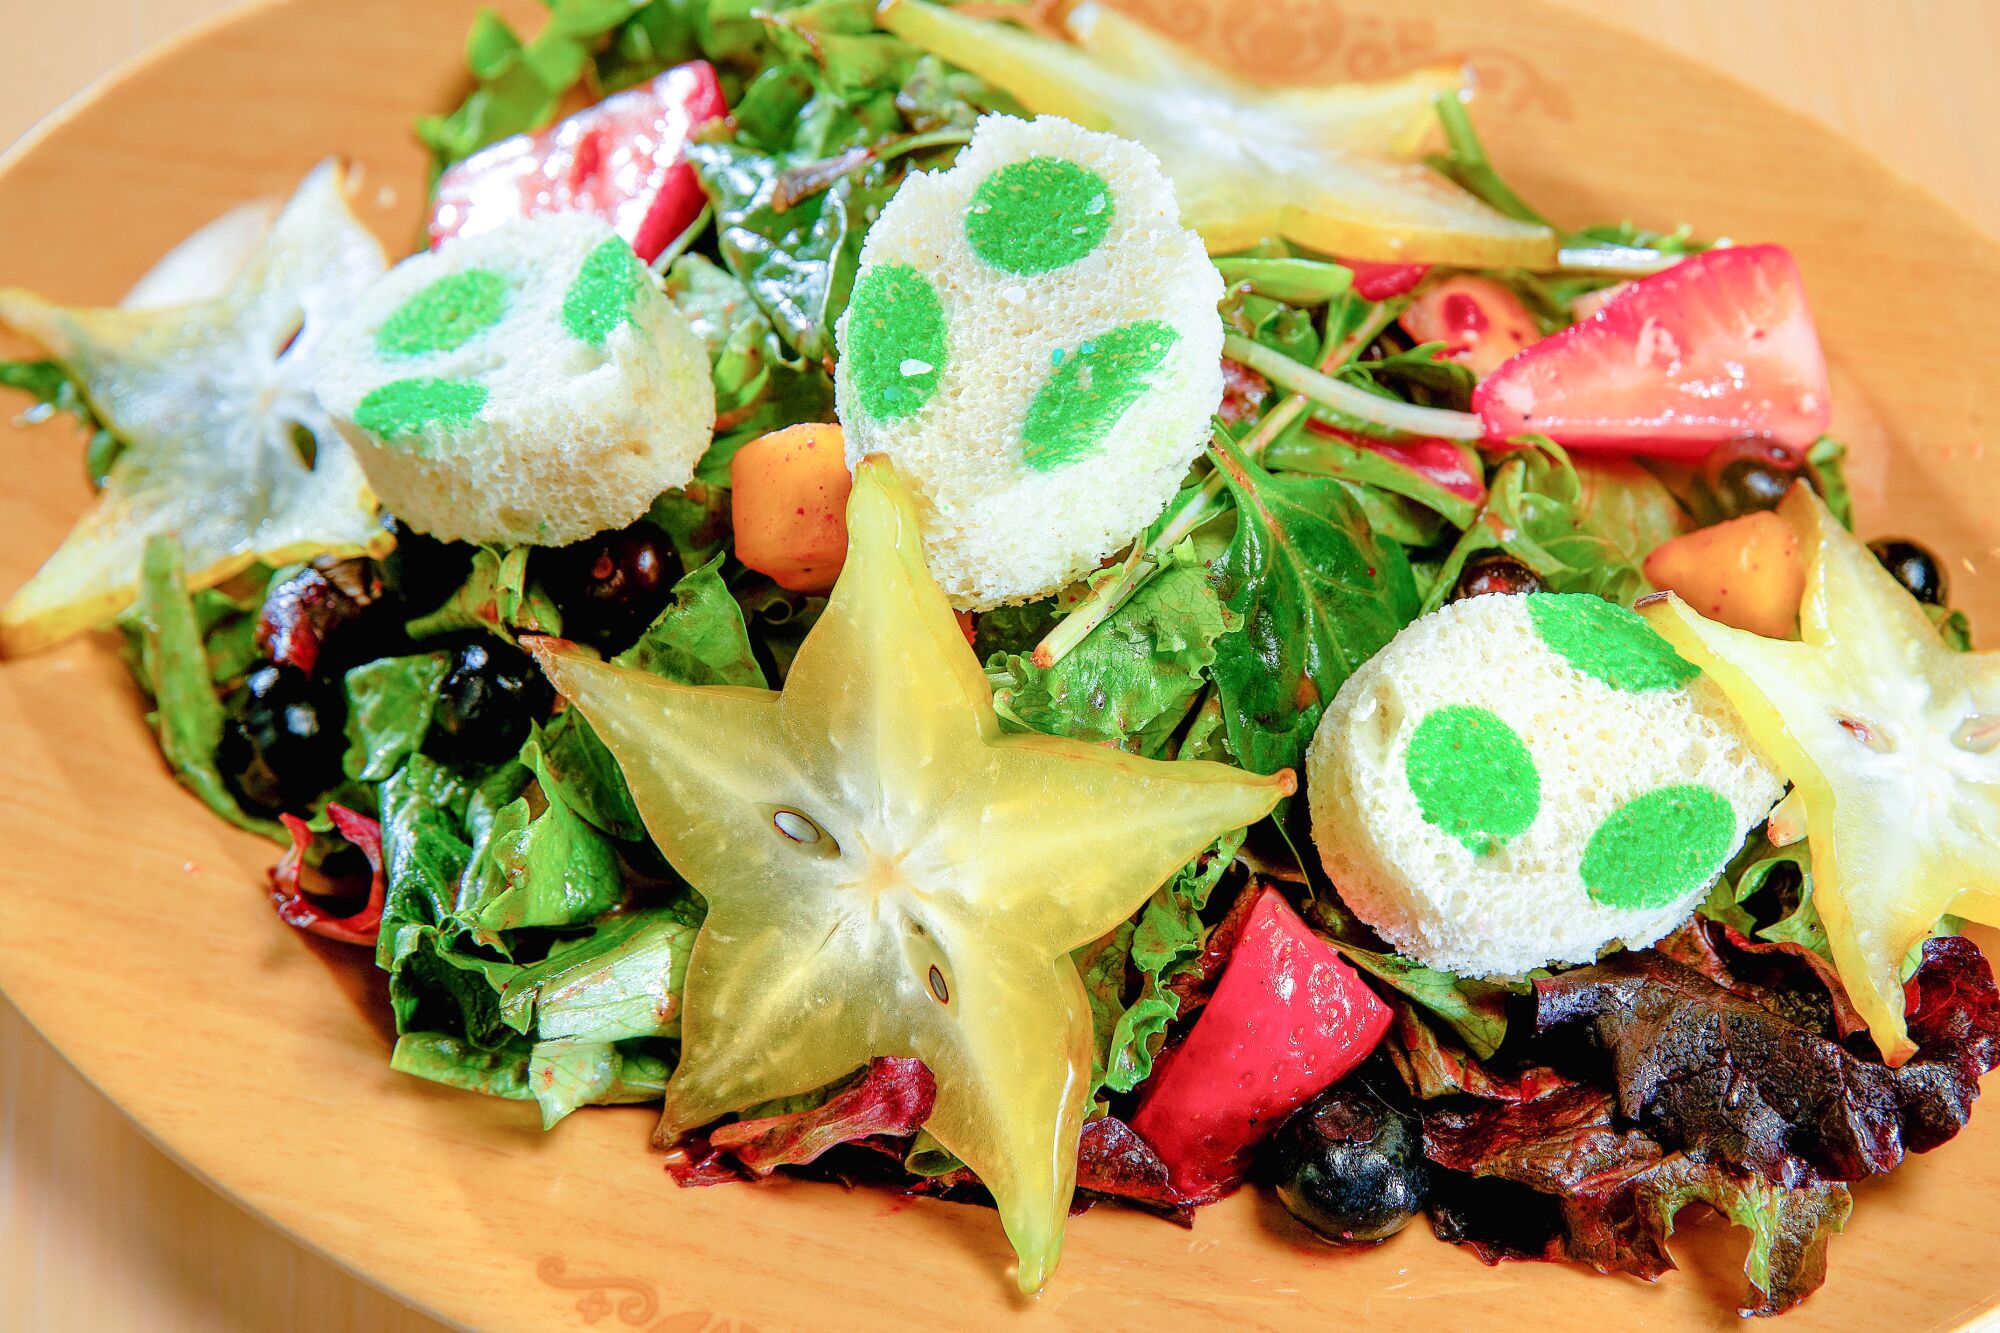 Yoshi’s Favorite Fruit and Veggie Salad is on the menu at Toadstool Cafe.